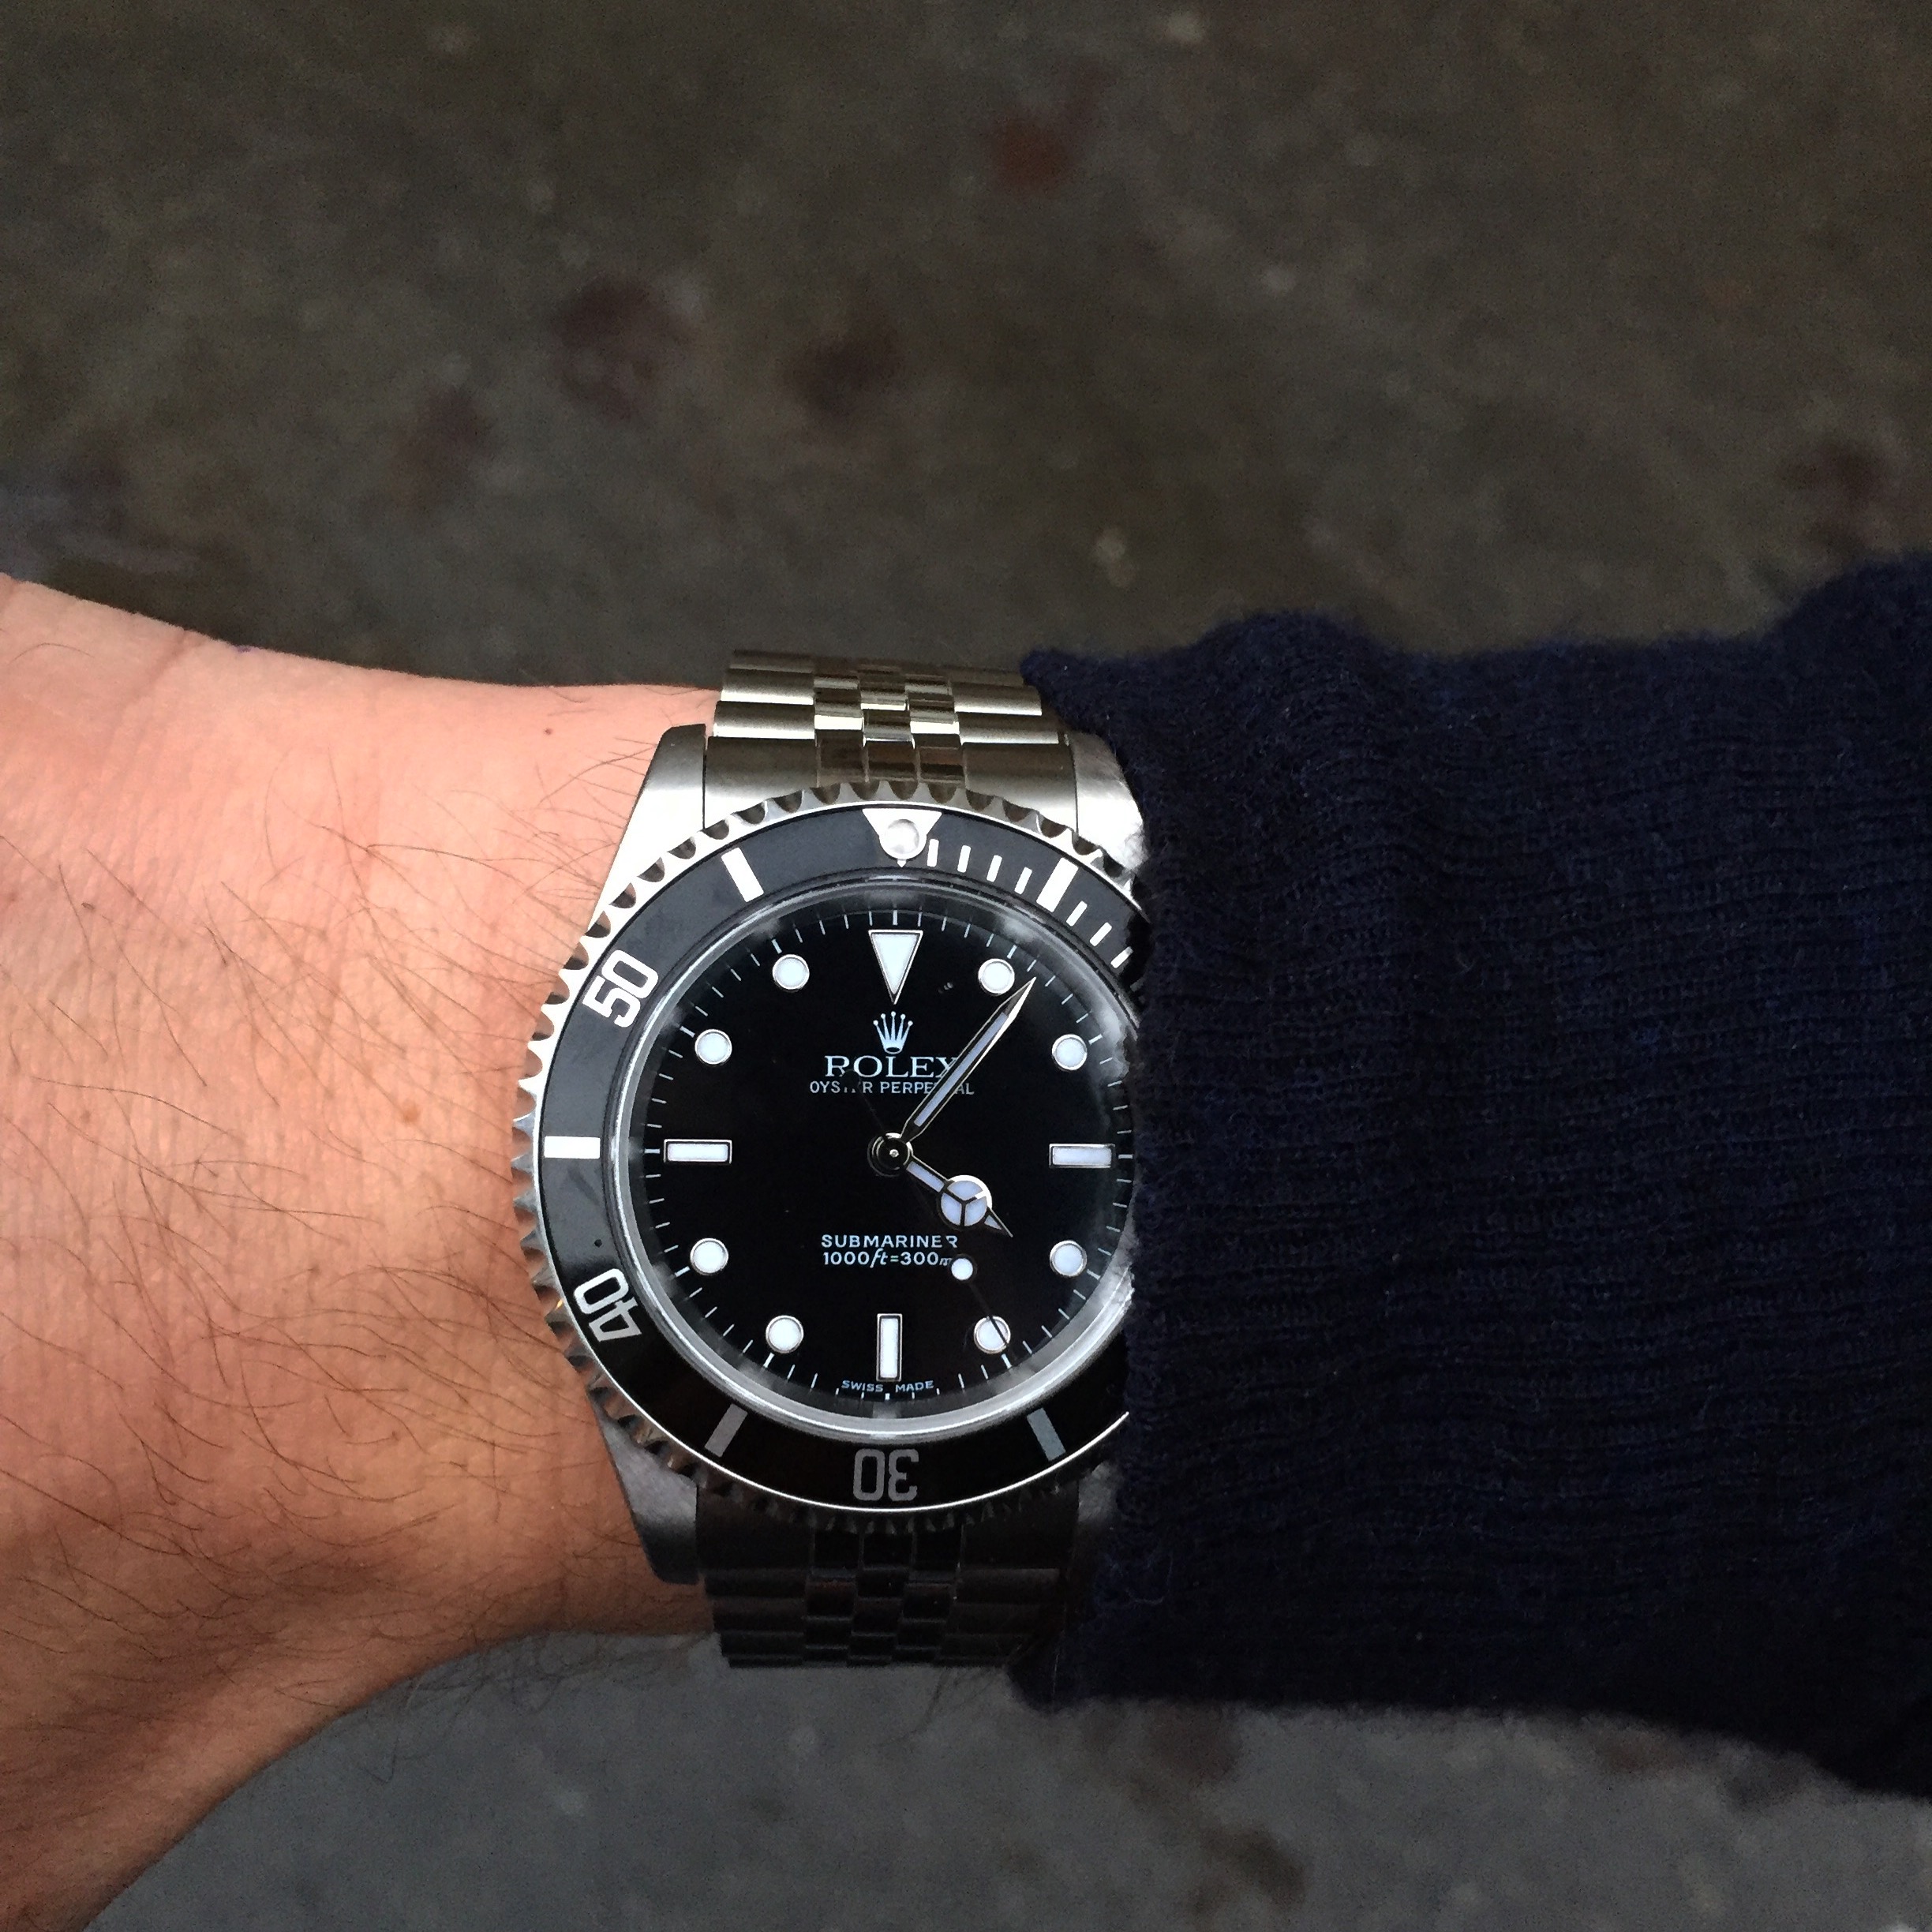 Considerations for a modern Submariner 